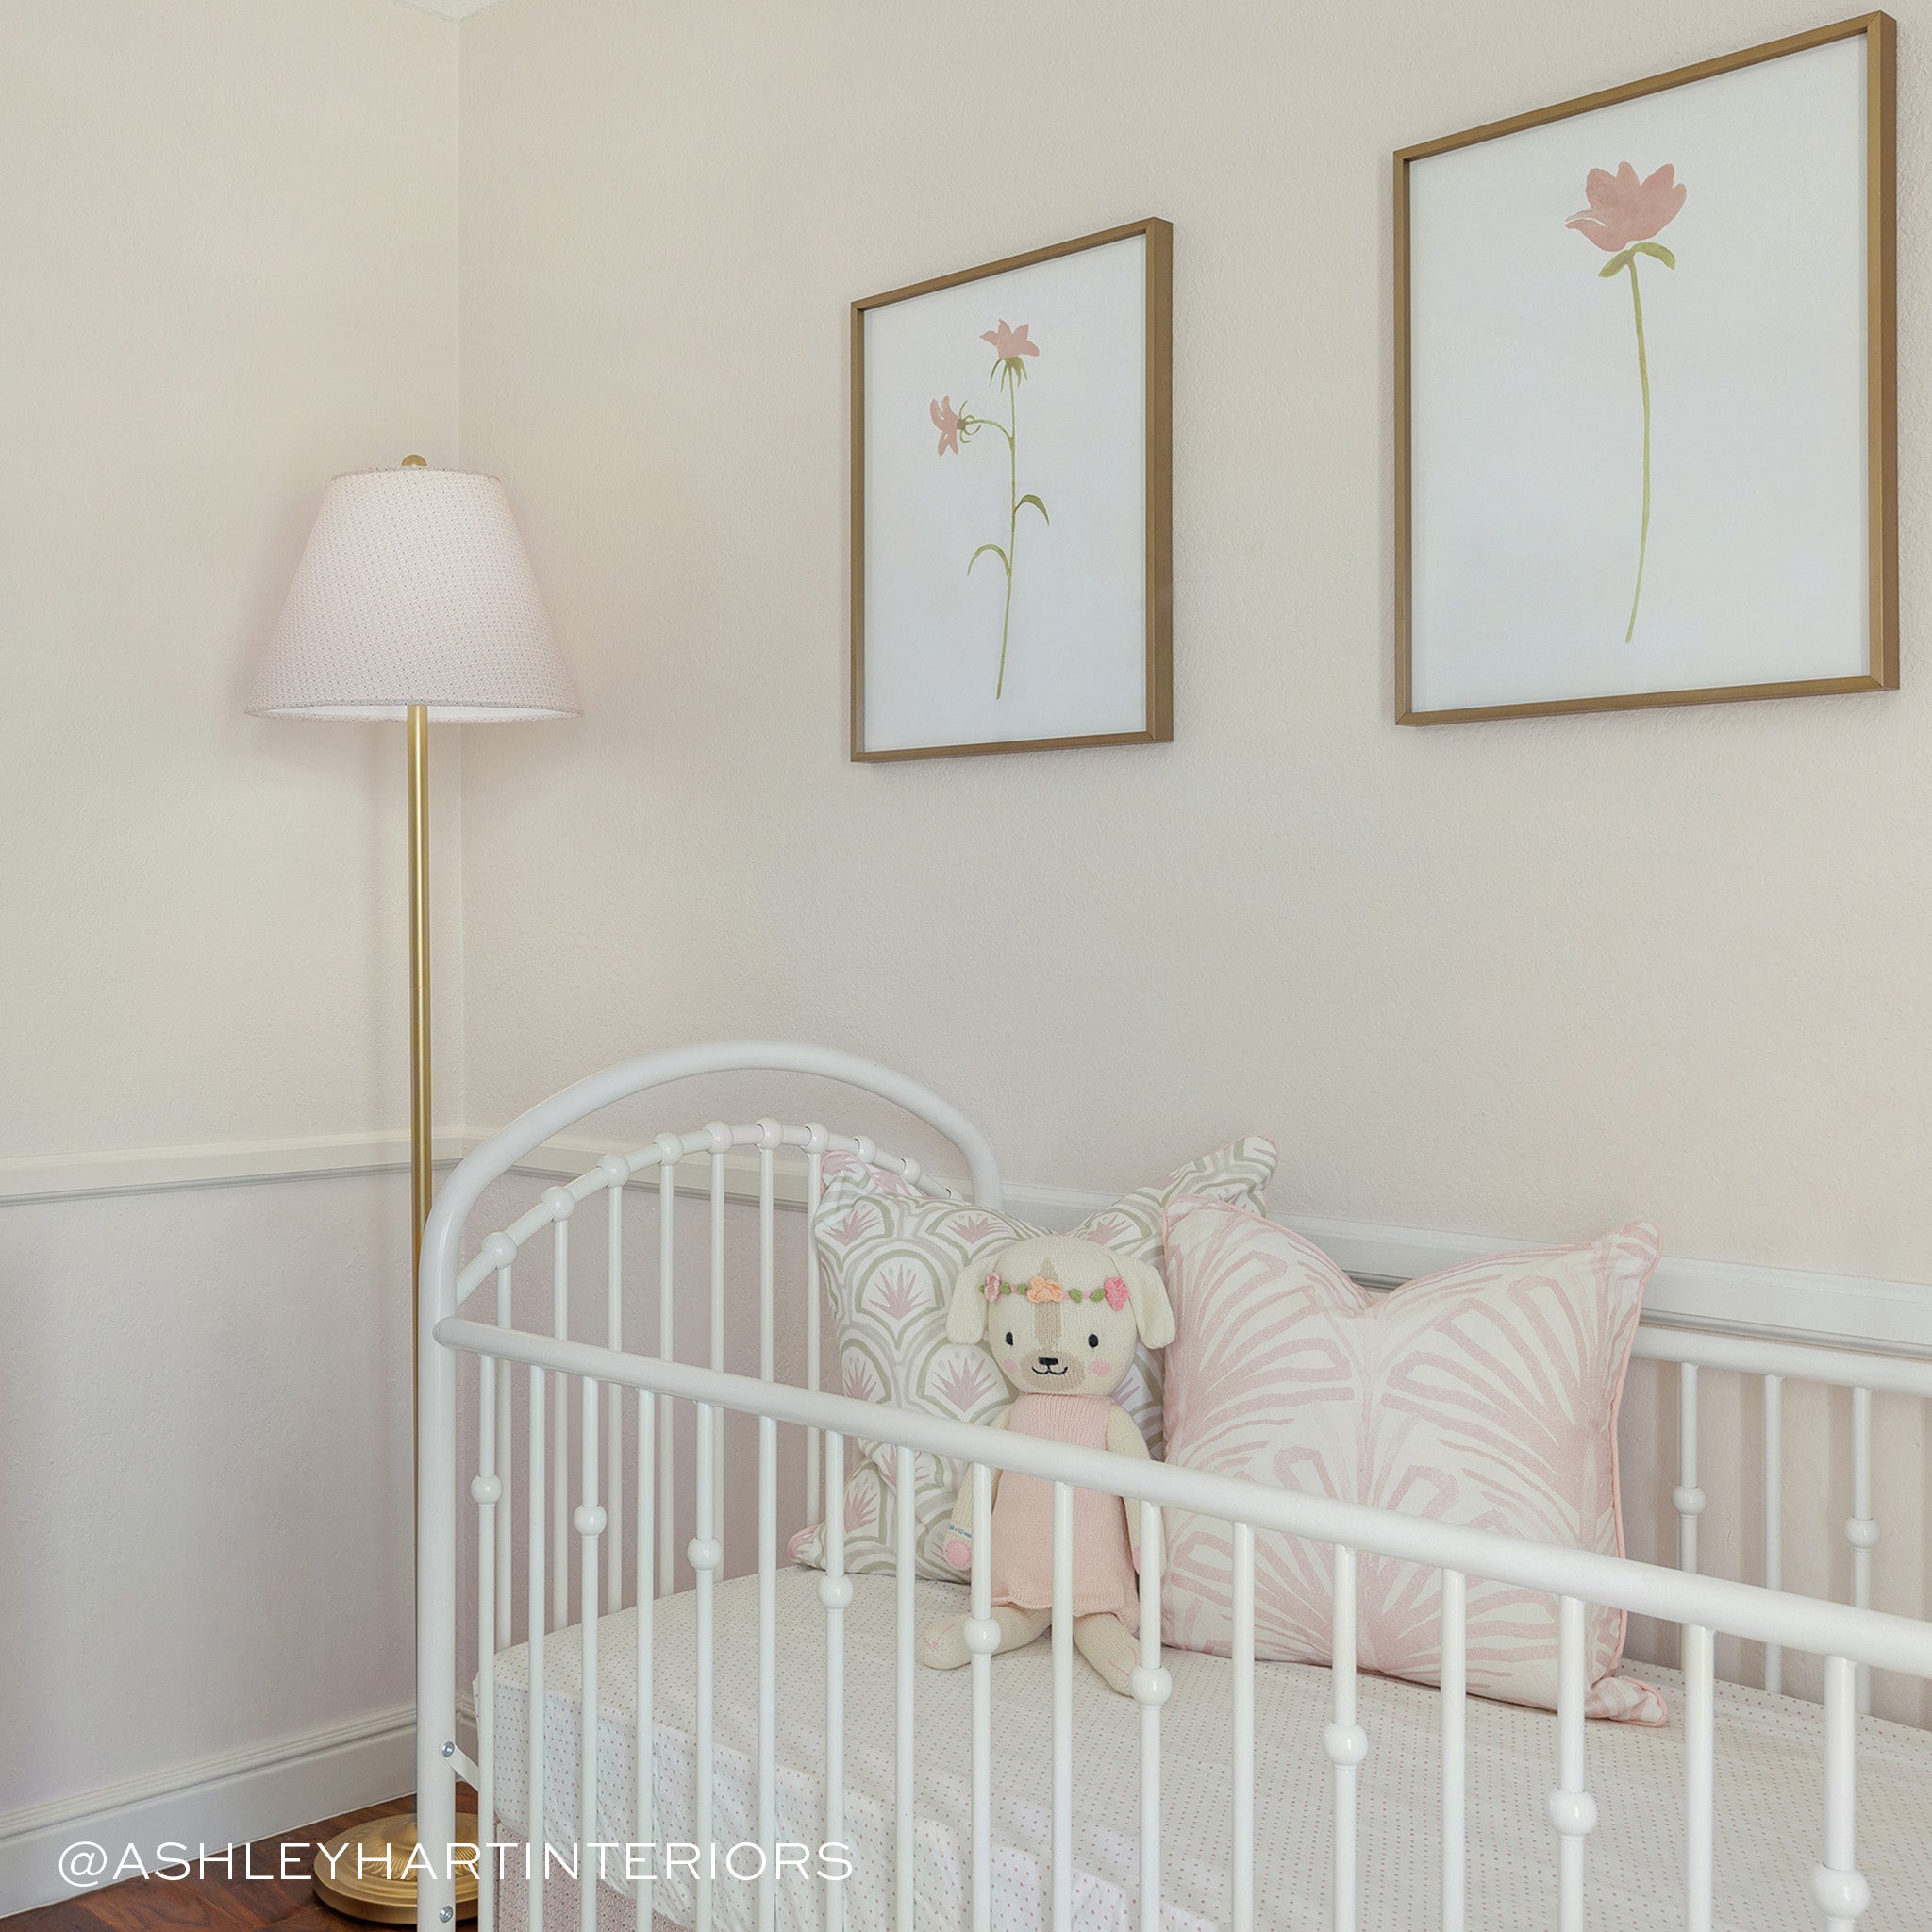 Nursery crib styled with a Pink & Green Palm Printed Pillow and a Rose Pink Palm Printed Pillow. Photo taken by Ashley Hart Interiors